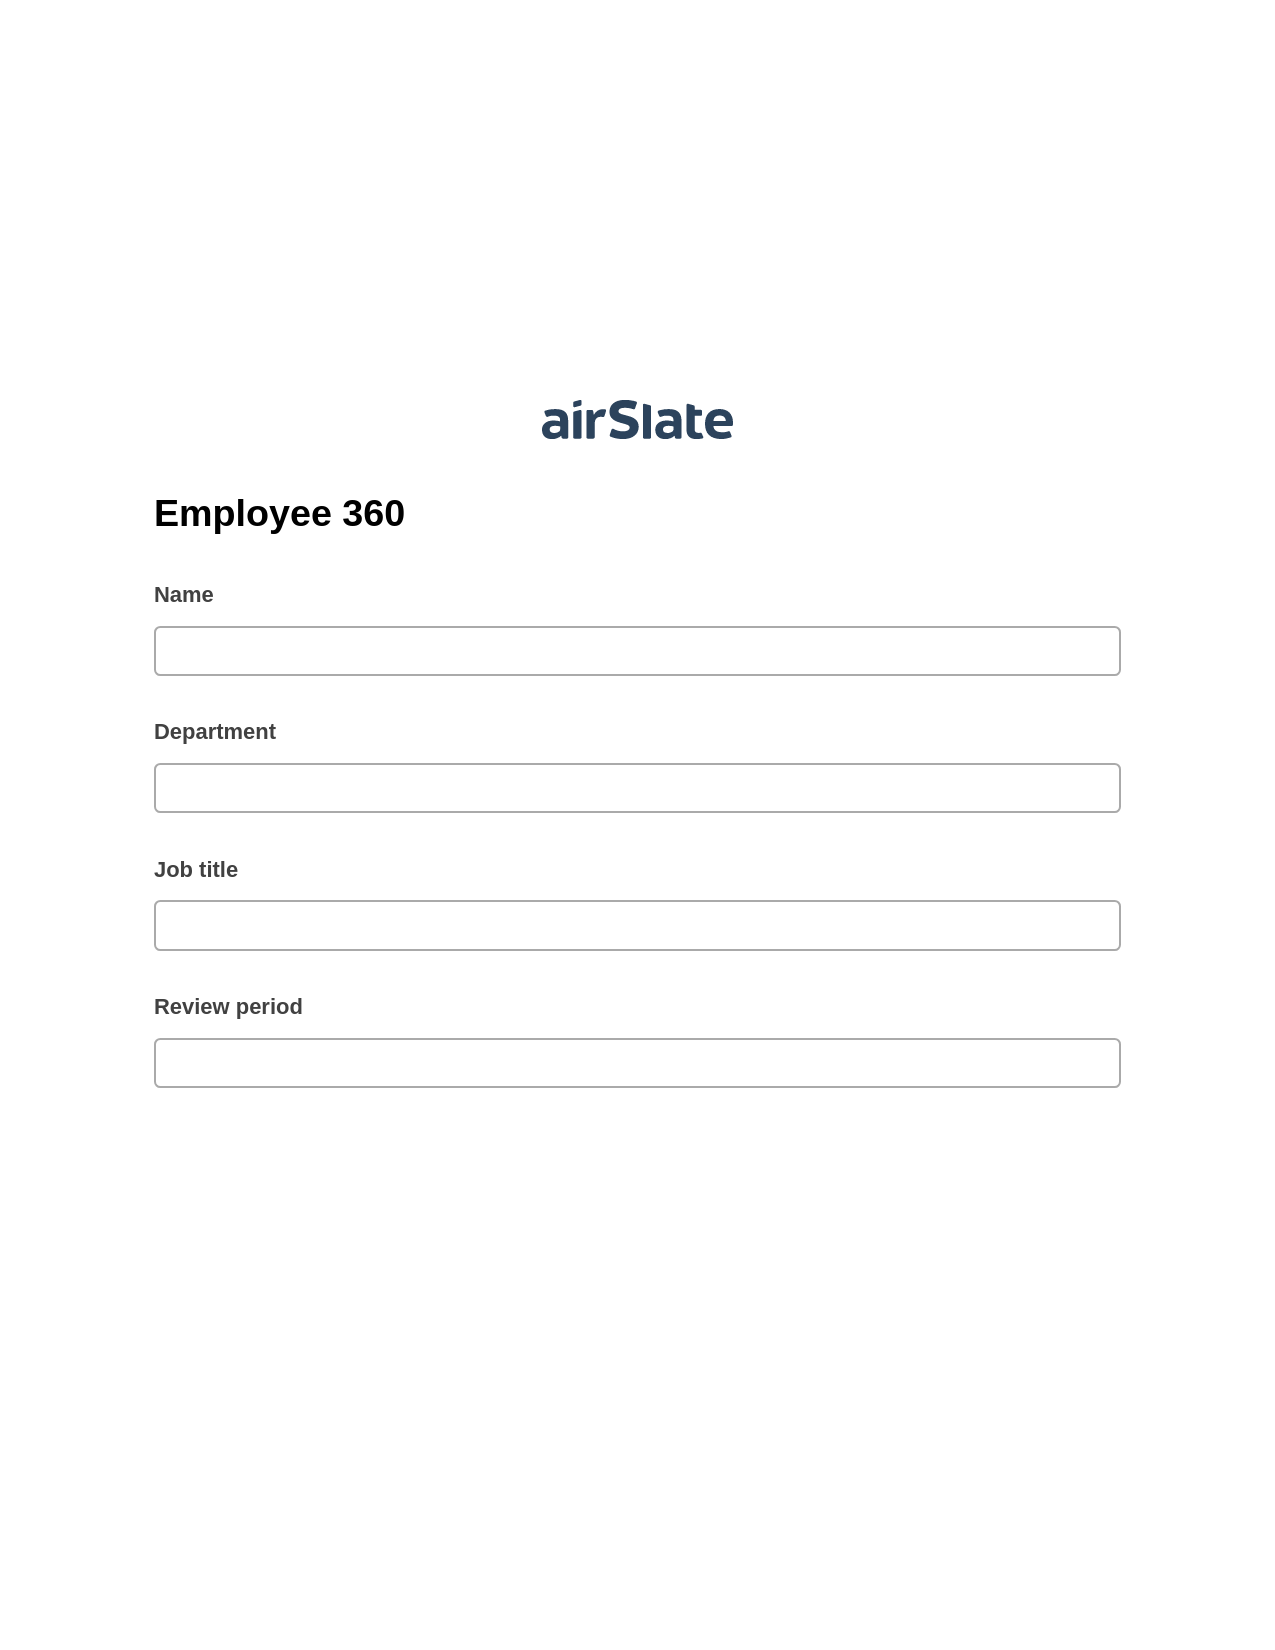 Employee 360 Pre-fill from MS Dynamics 365 Records, Create MS Dynamics 365 Records Bot, Post-finish Document Bot